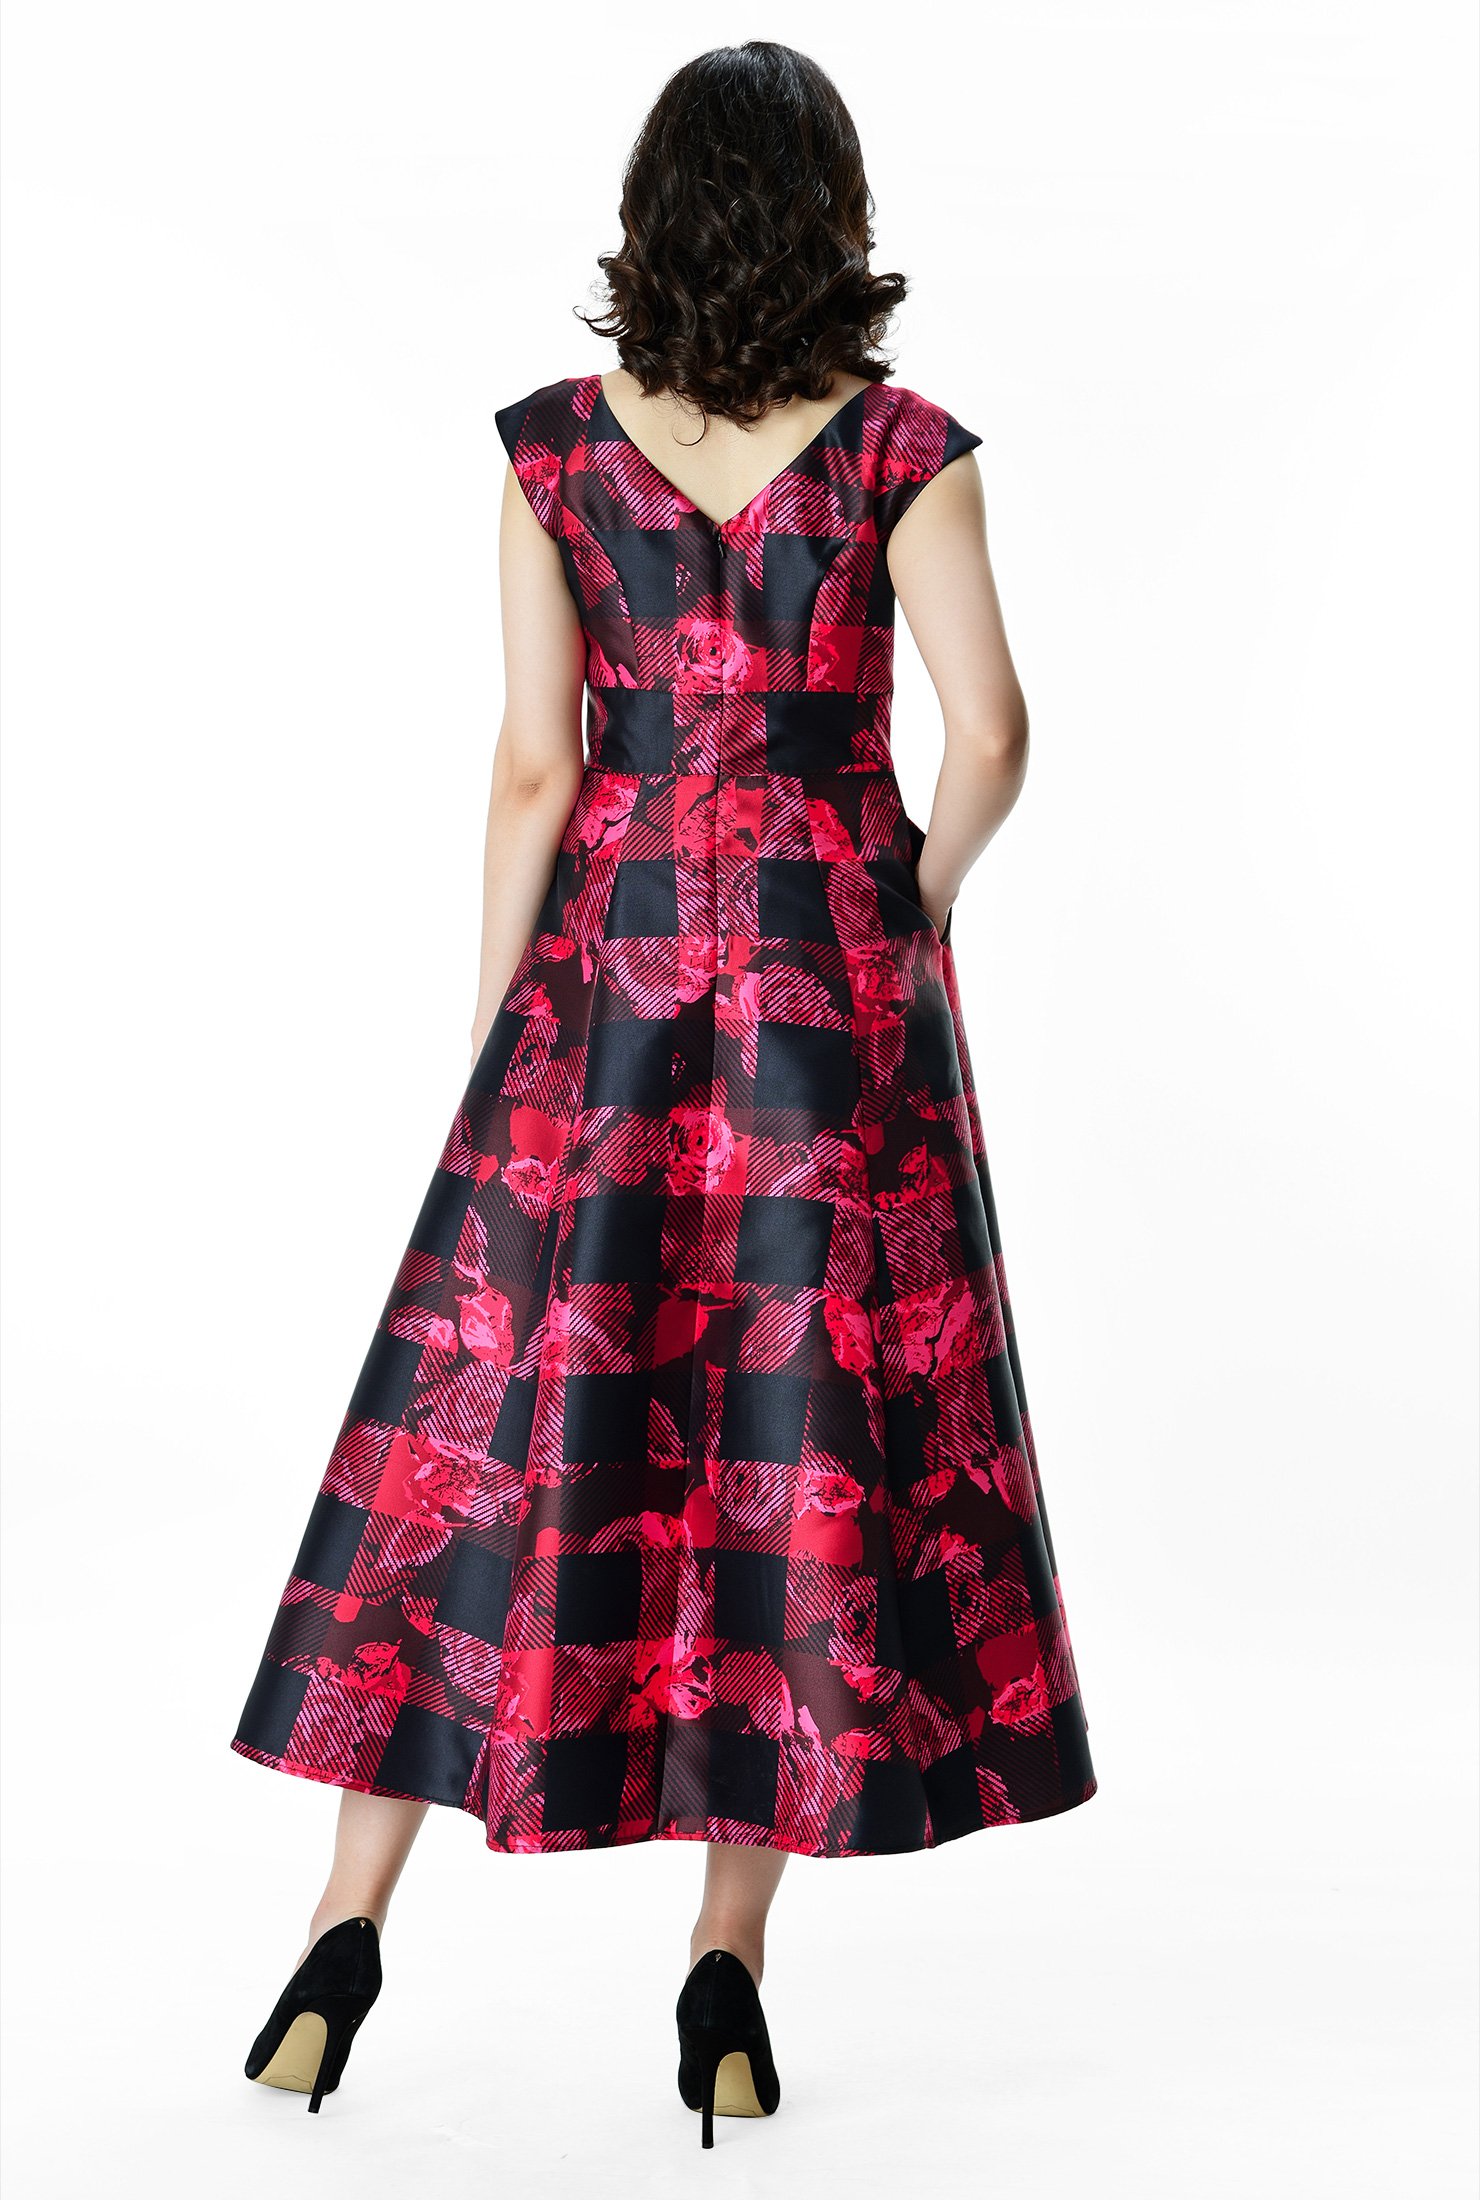 A standout for special occasions with its elegant silhouette, our floral and check print dress is styled with a princess seamed bodice and full flared skirt.